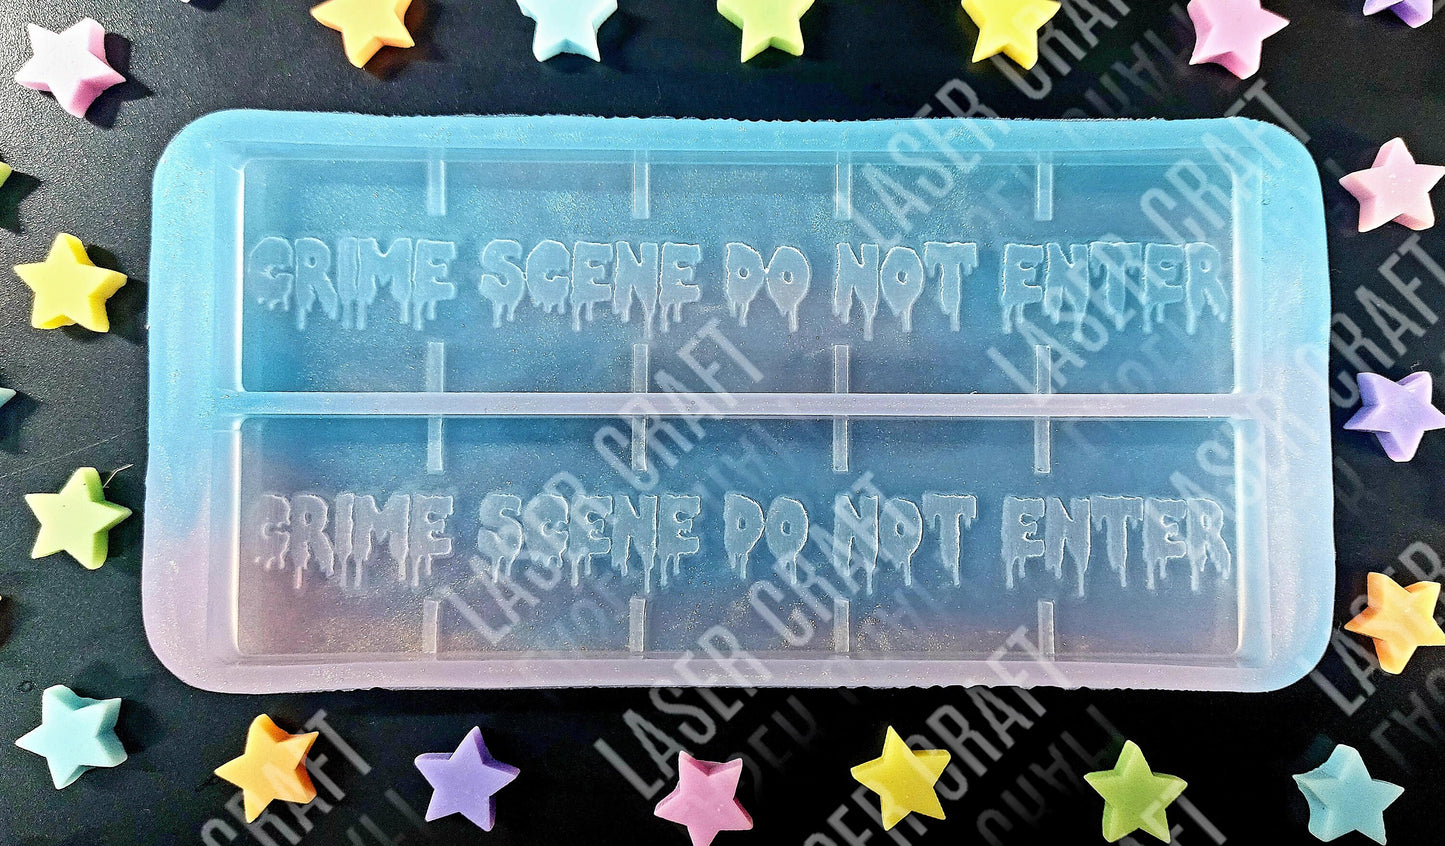 Crime Scene Snap Bar 2 Cell Silicone Mould for wax, resin etc